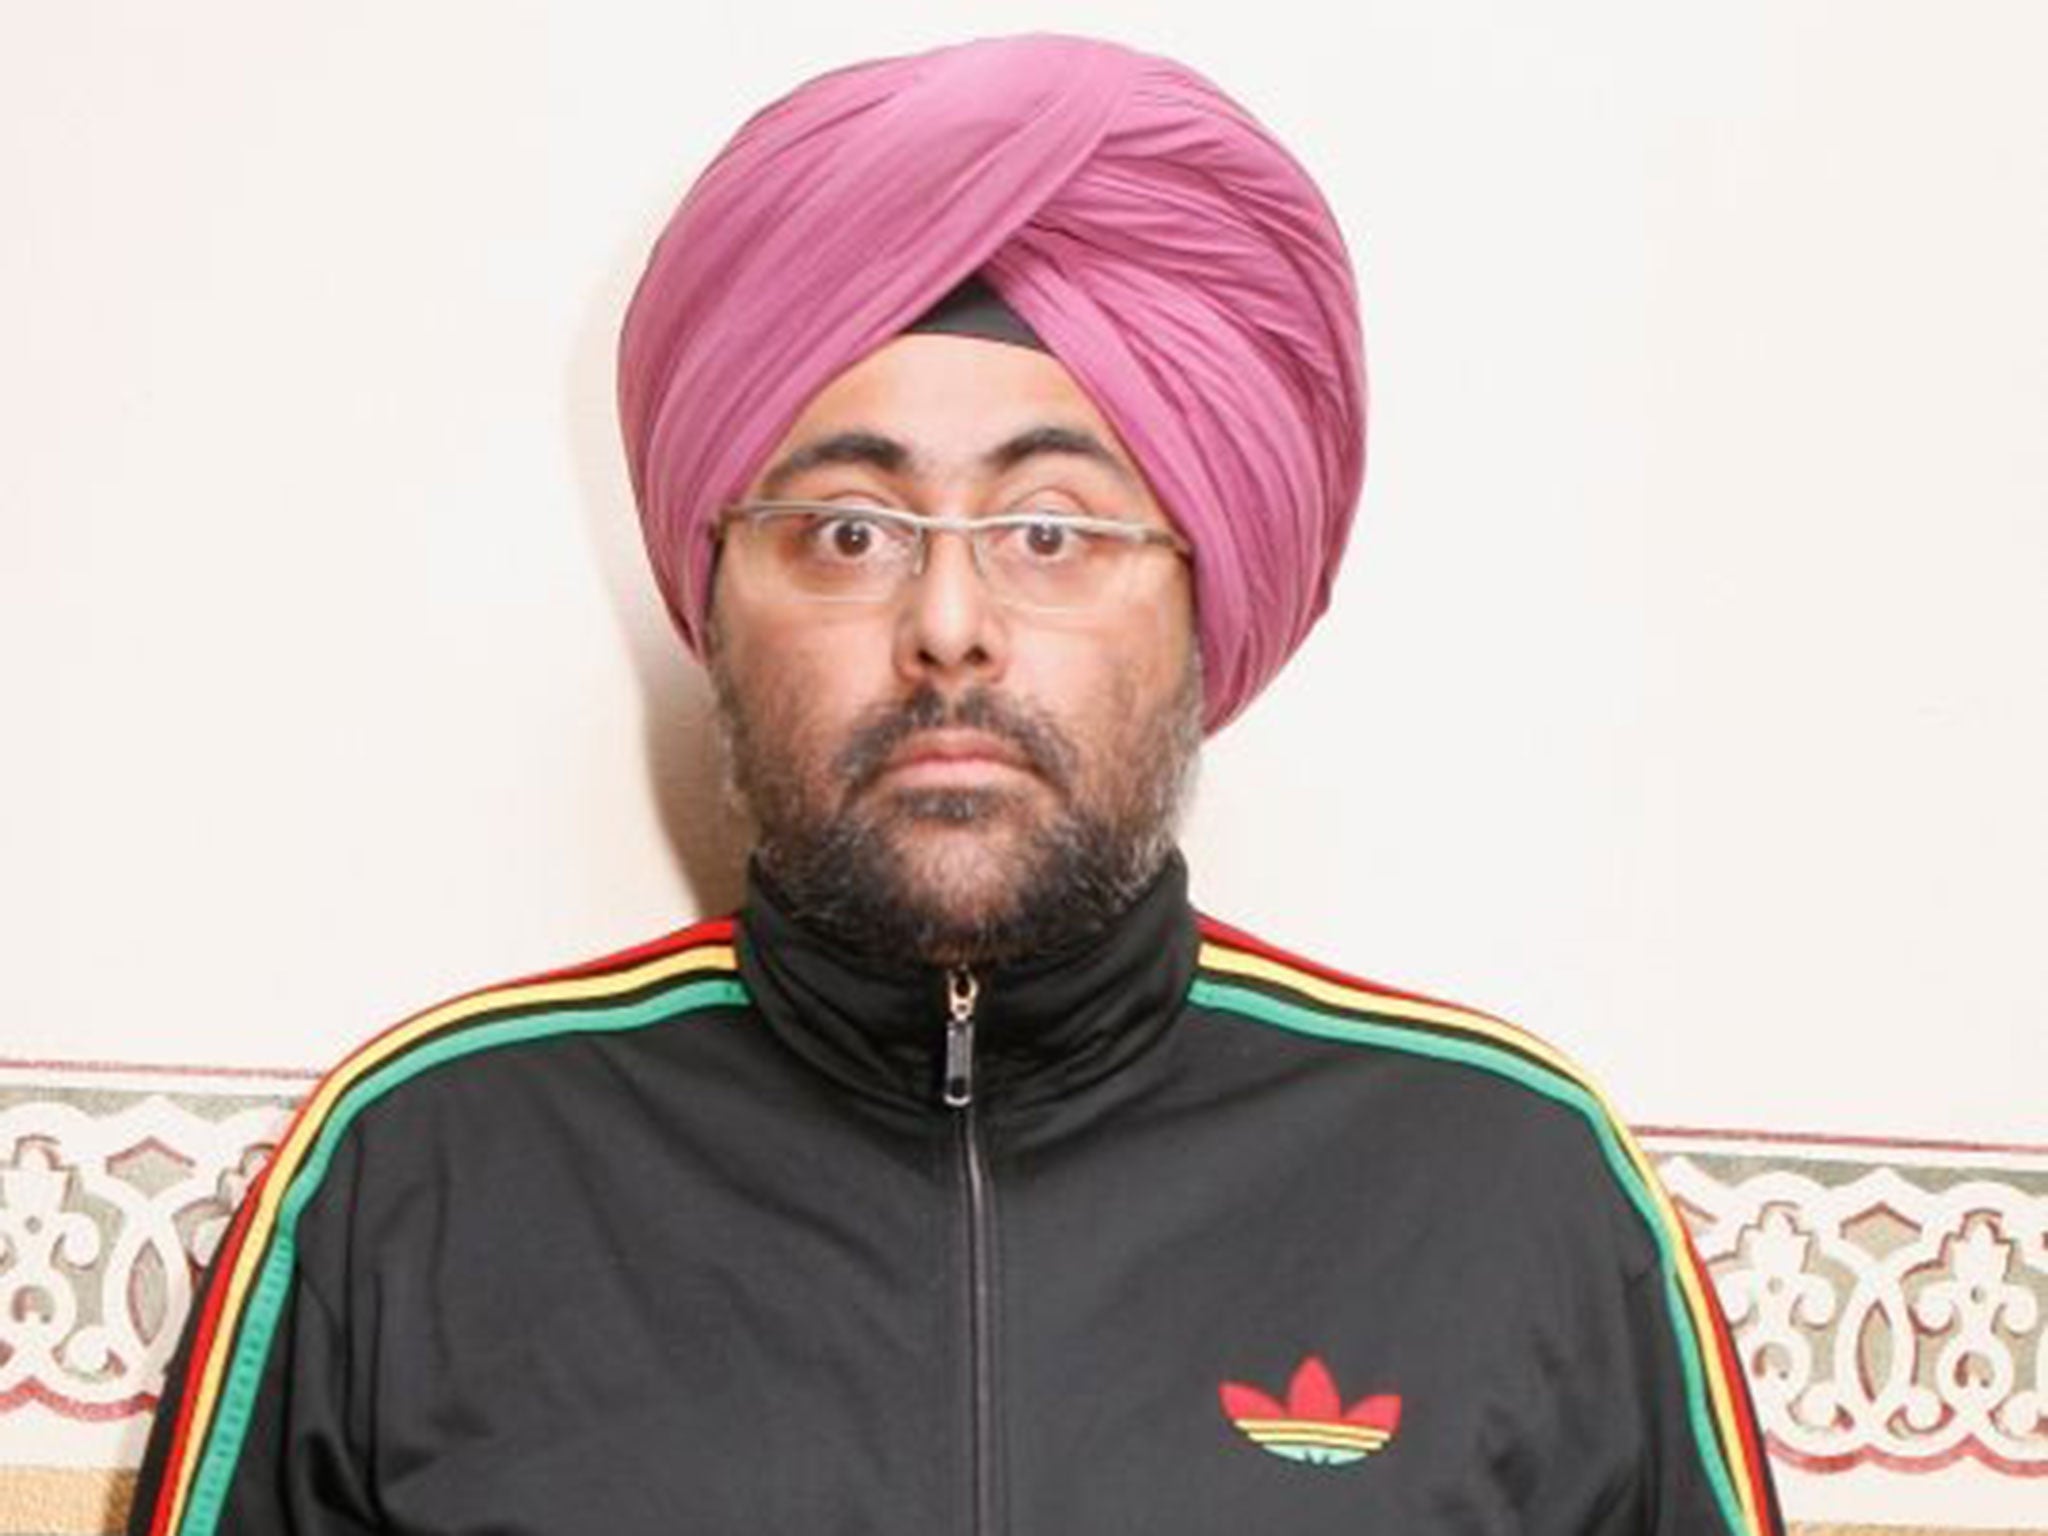 Comedian Hardeep Singh Kohli explores Scottish sport, but humour is thin on the ground